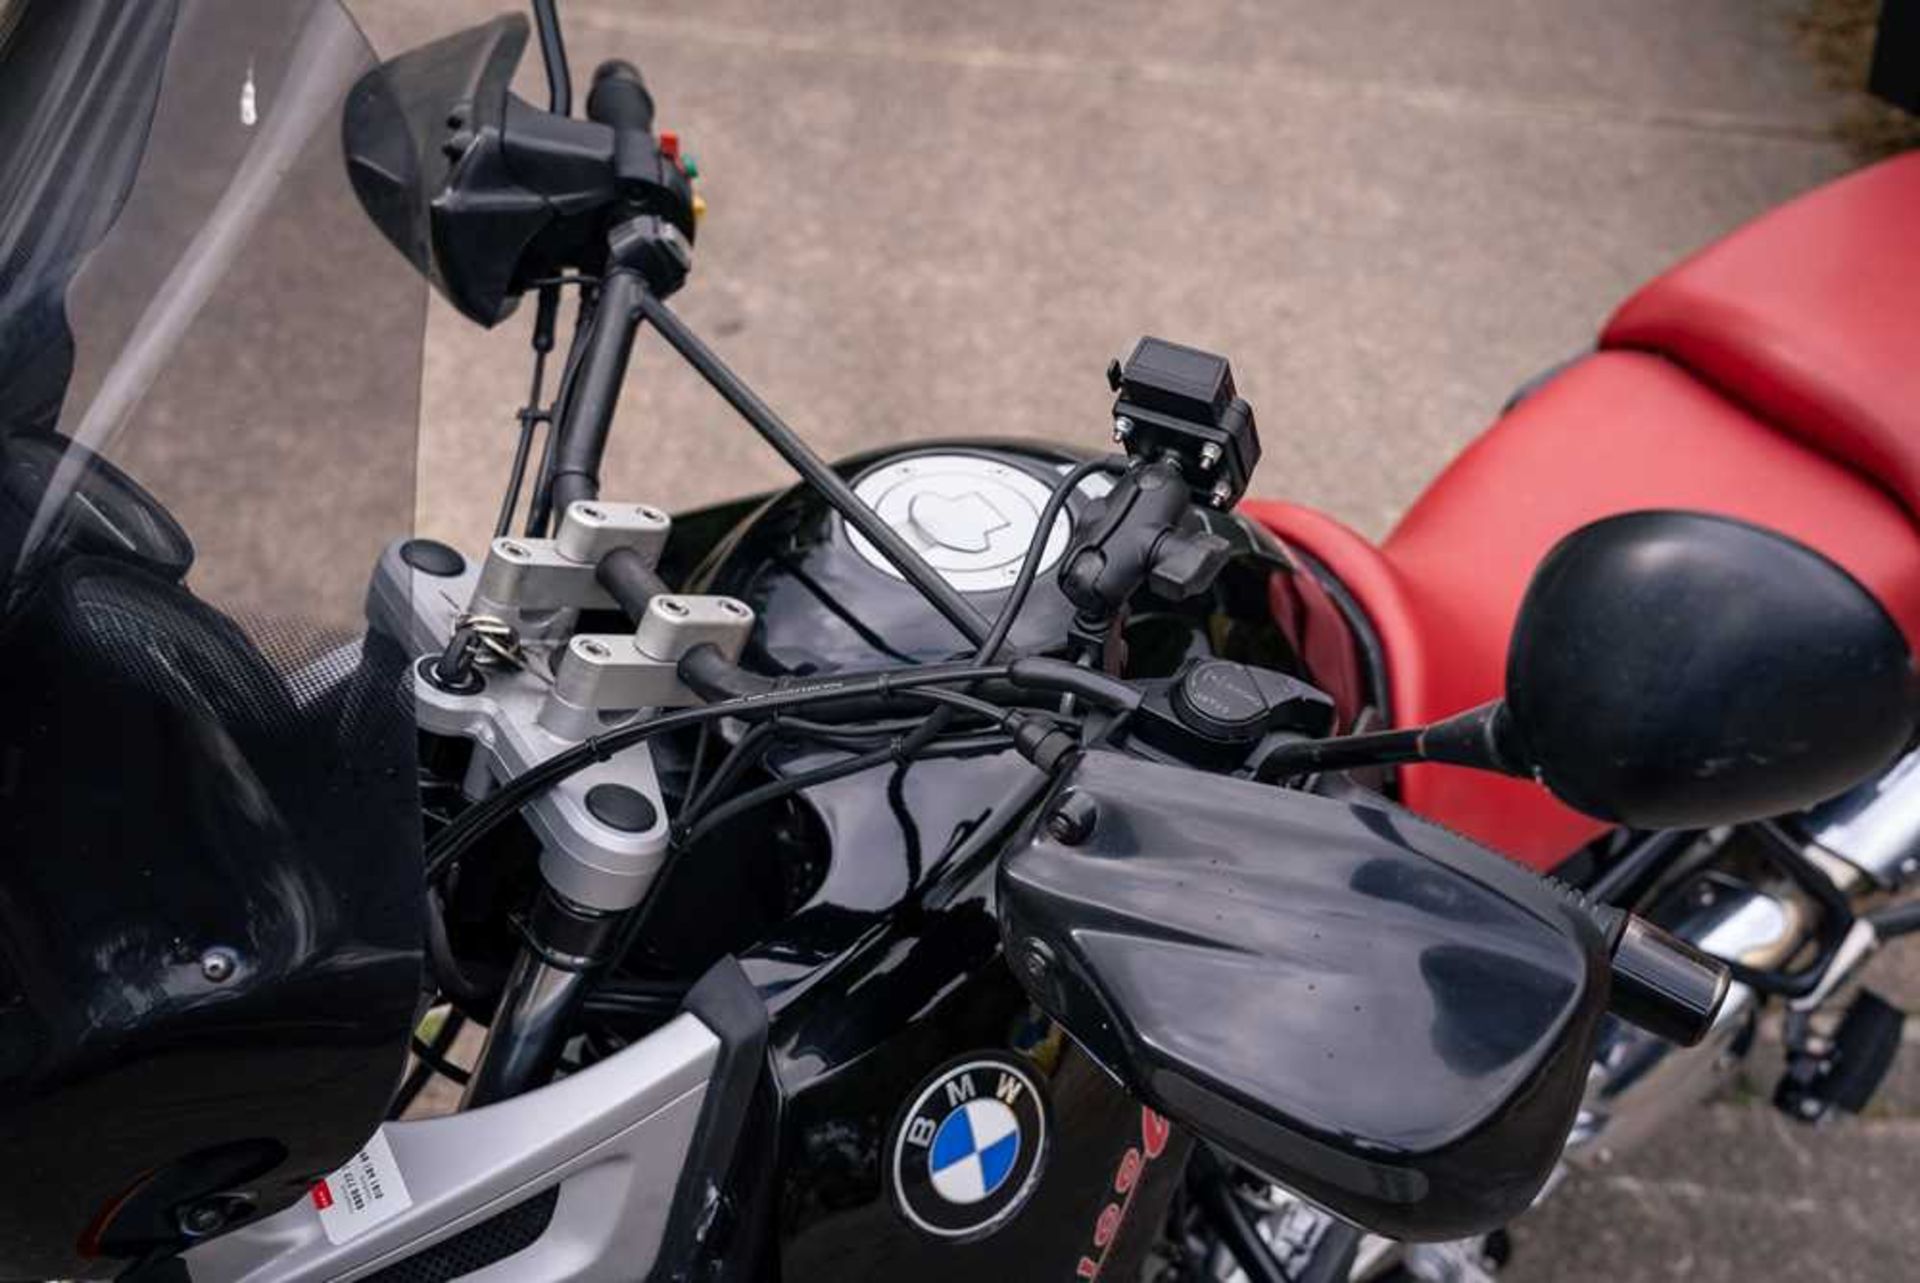 2000 BMW R1100GS Fitted with panniers, top box, and engine bars - Image 15 of 34